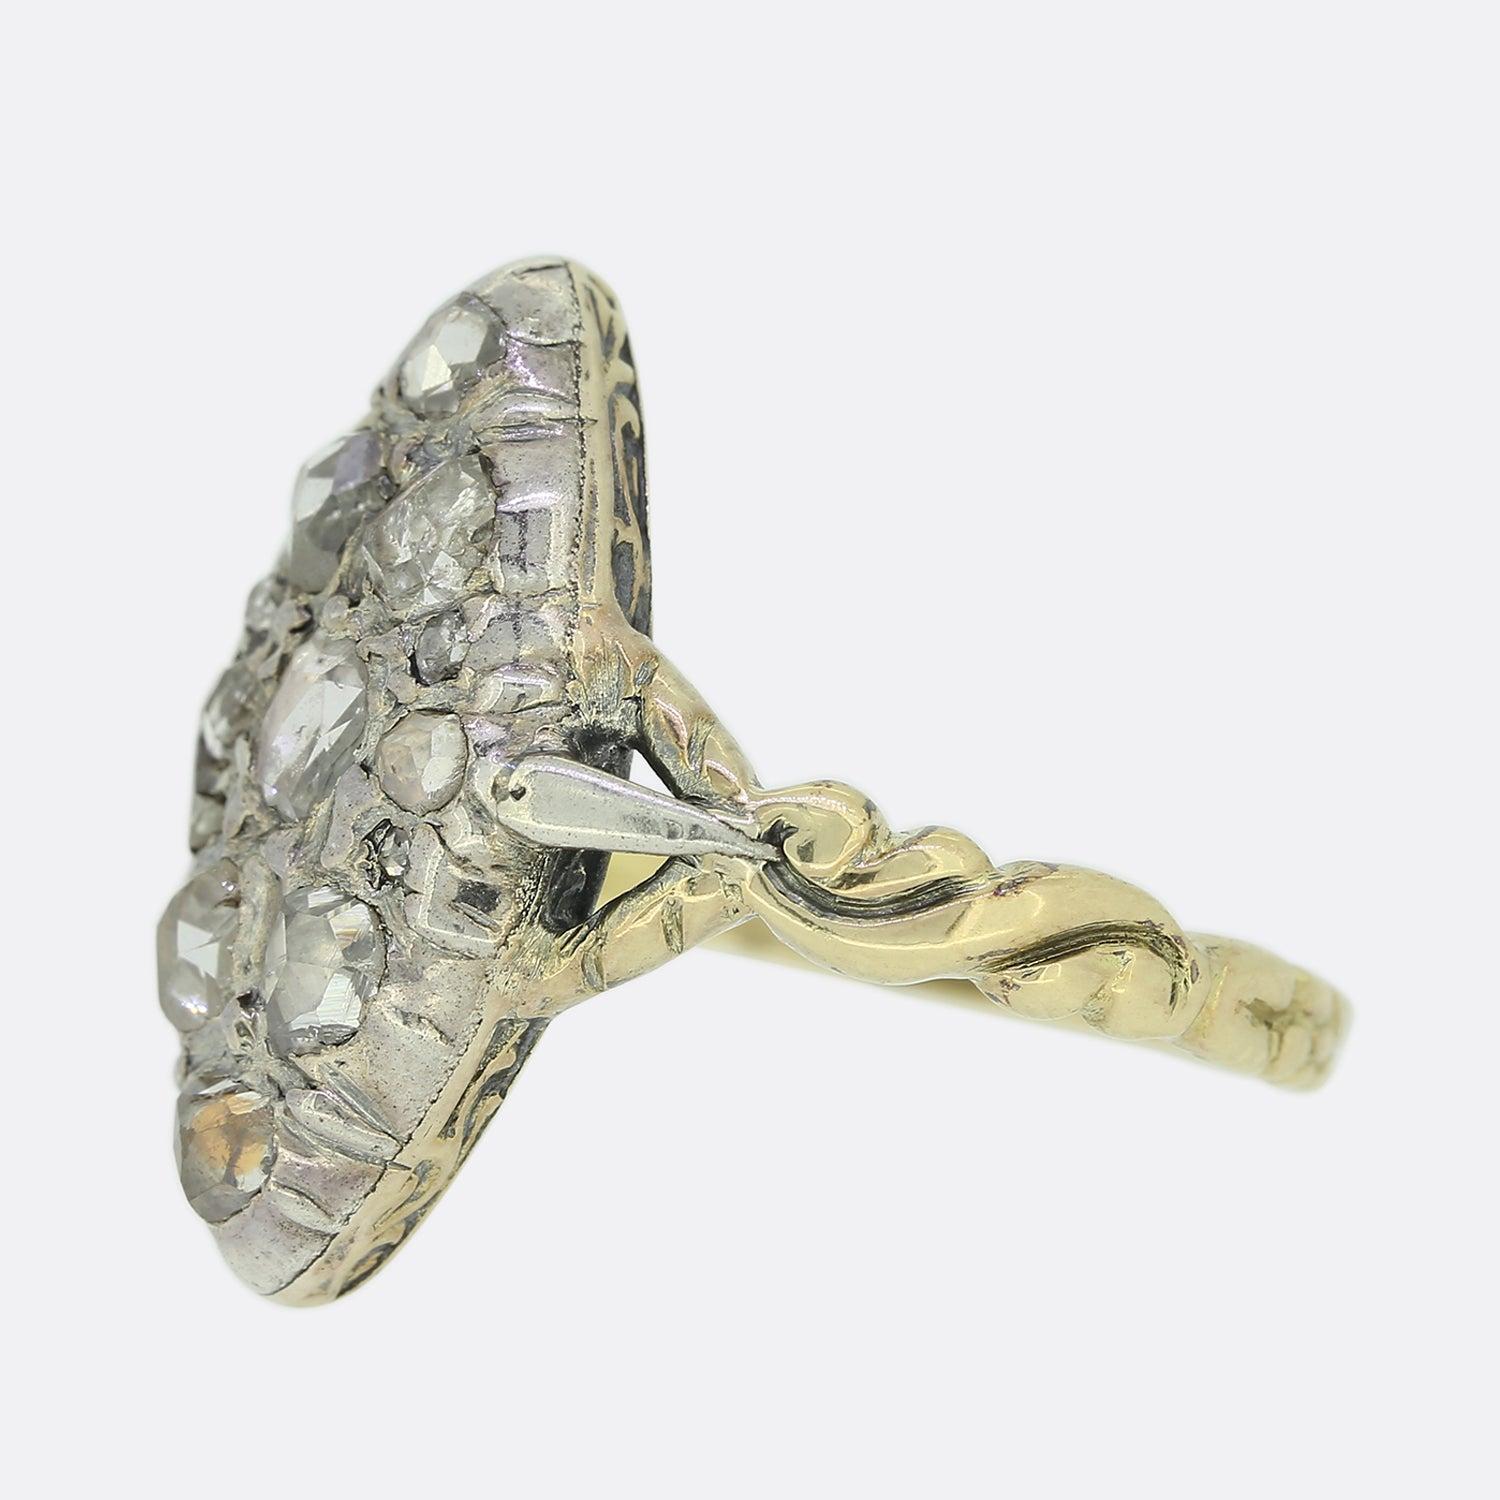 This is an antique diamond navette ring dating back to the Georgian era. It features an array of closely individually tension set rose cut diamonds of differing shapes and sizes; all of which are mounted in silver within a closed back setting whilst